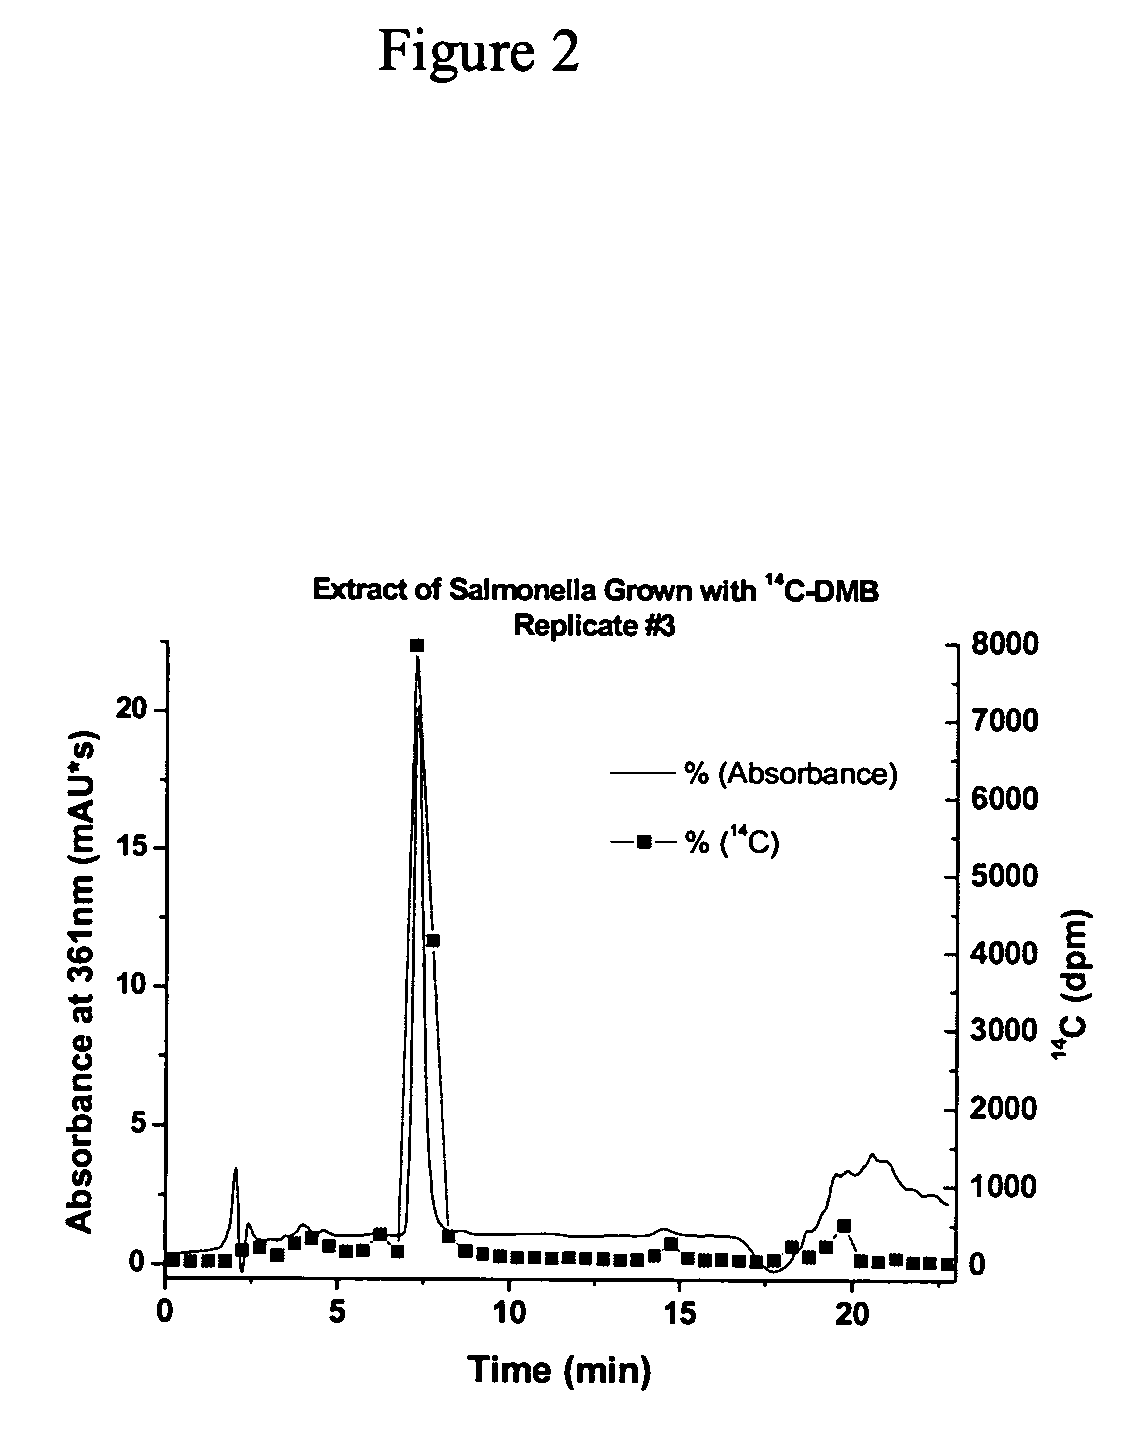 Assay for vitamin B12 absorption and method of making labeled vitamin B12